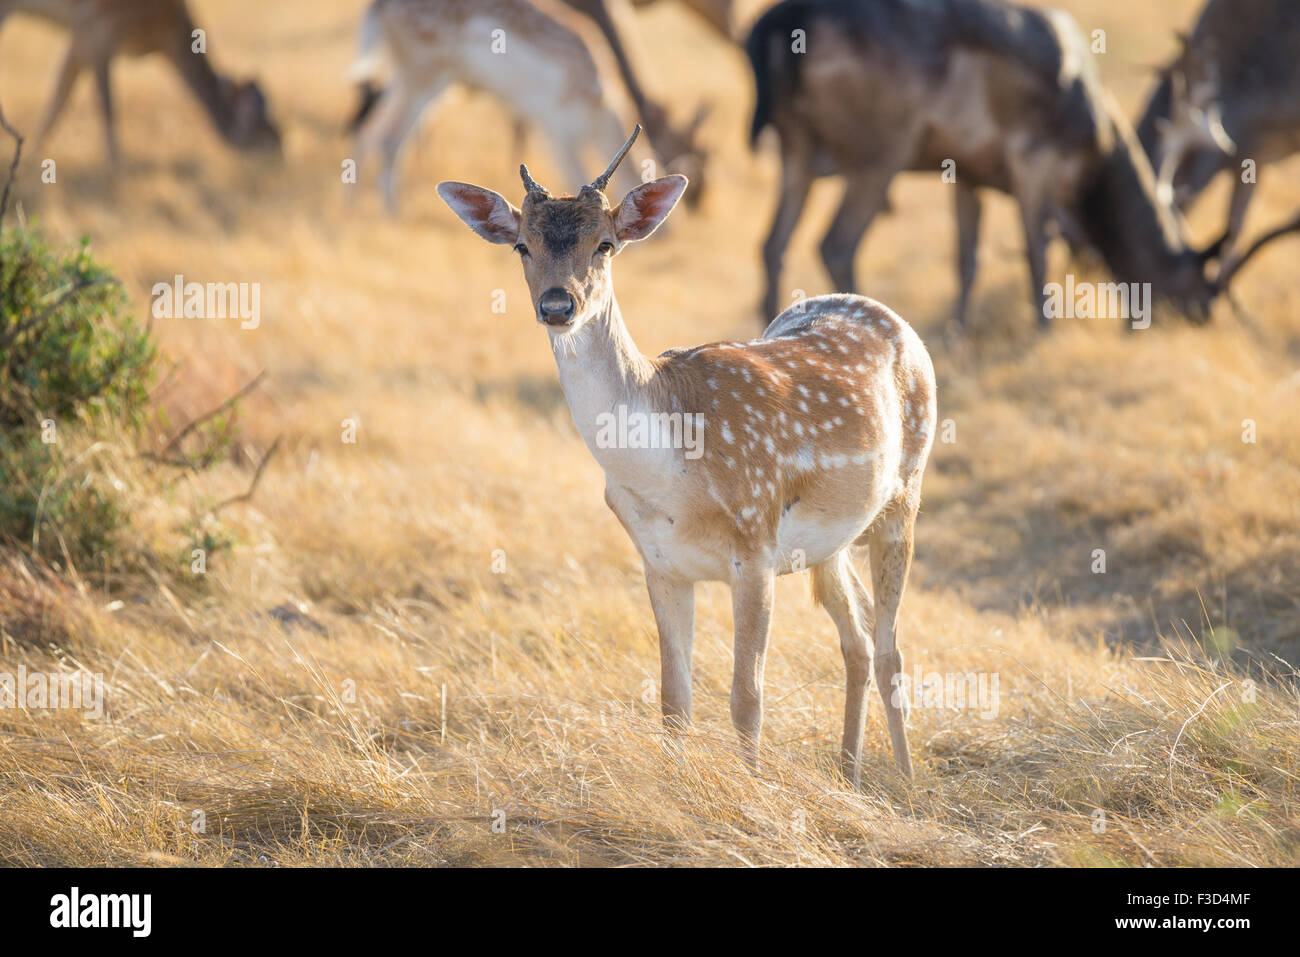 Wild South Texas spotted daini buck yearling Foto Stock